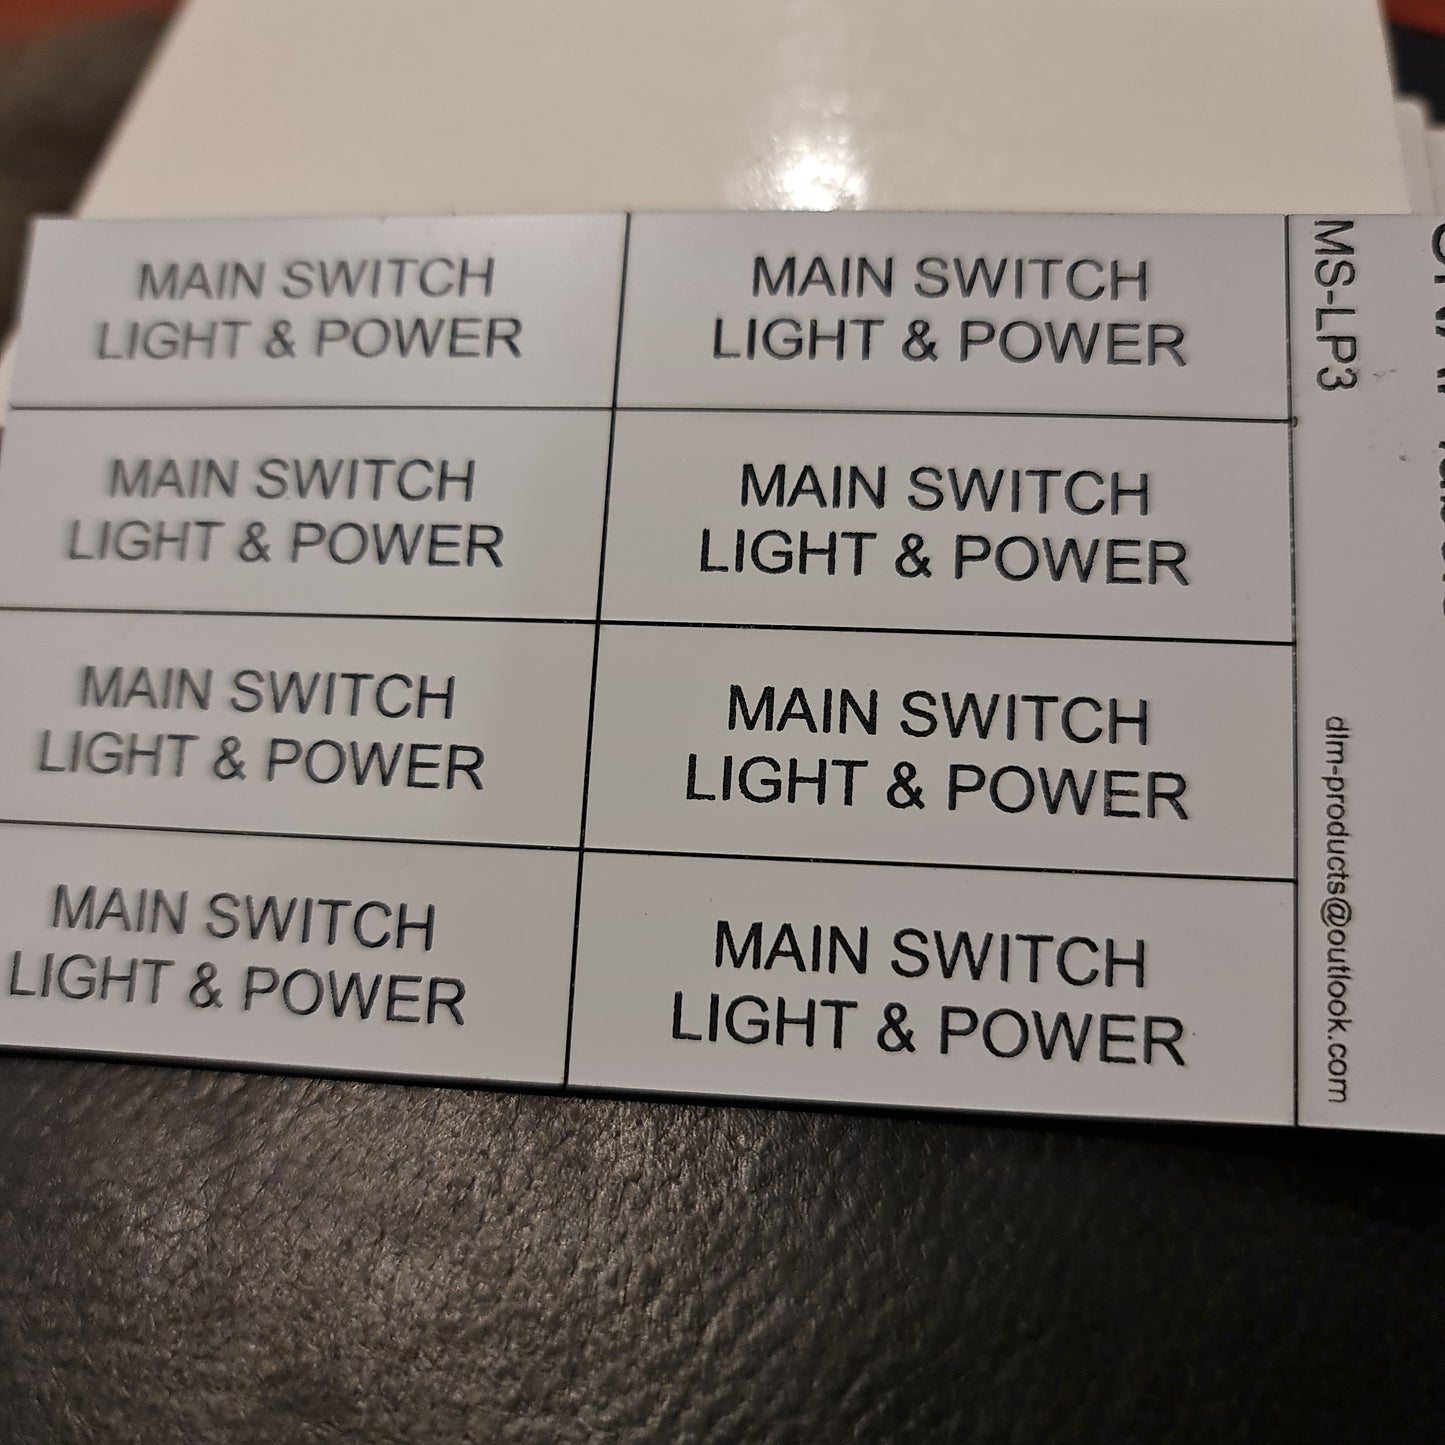 3 Phase main switch Light Power